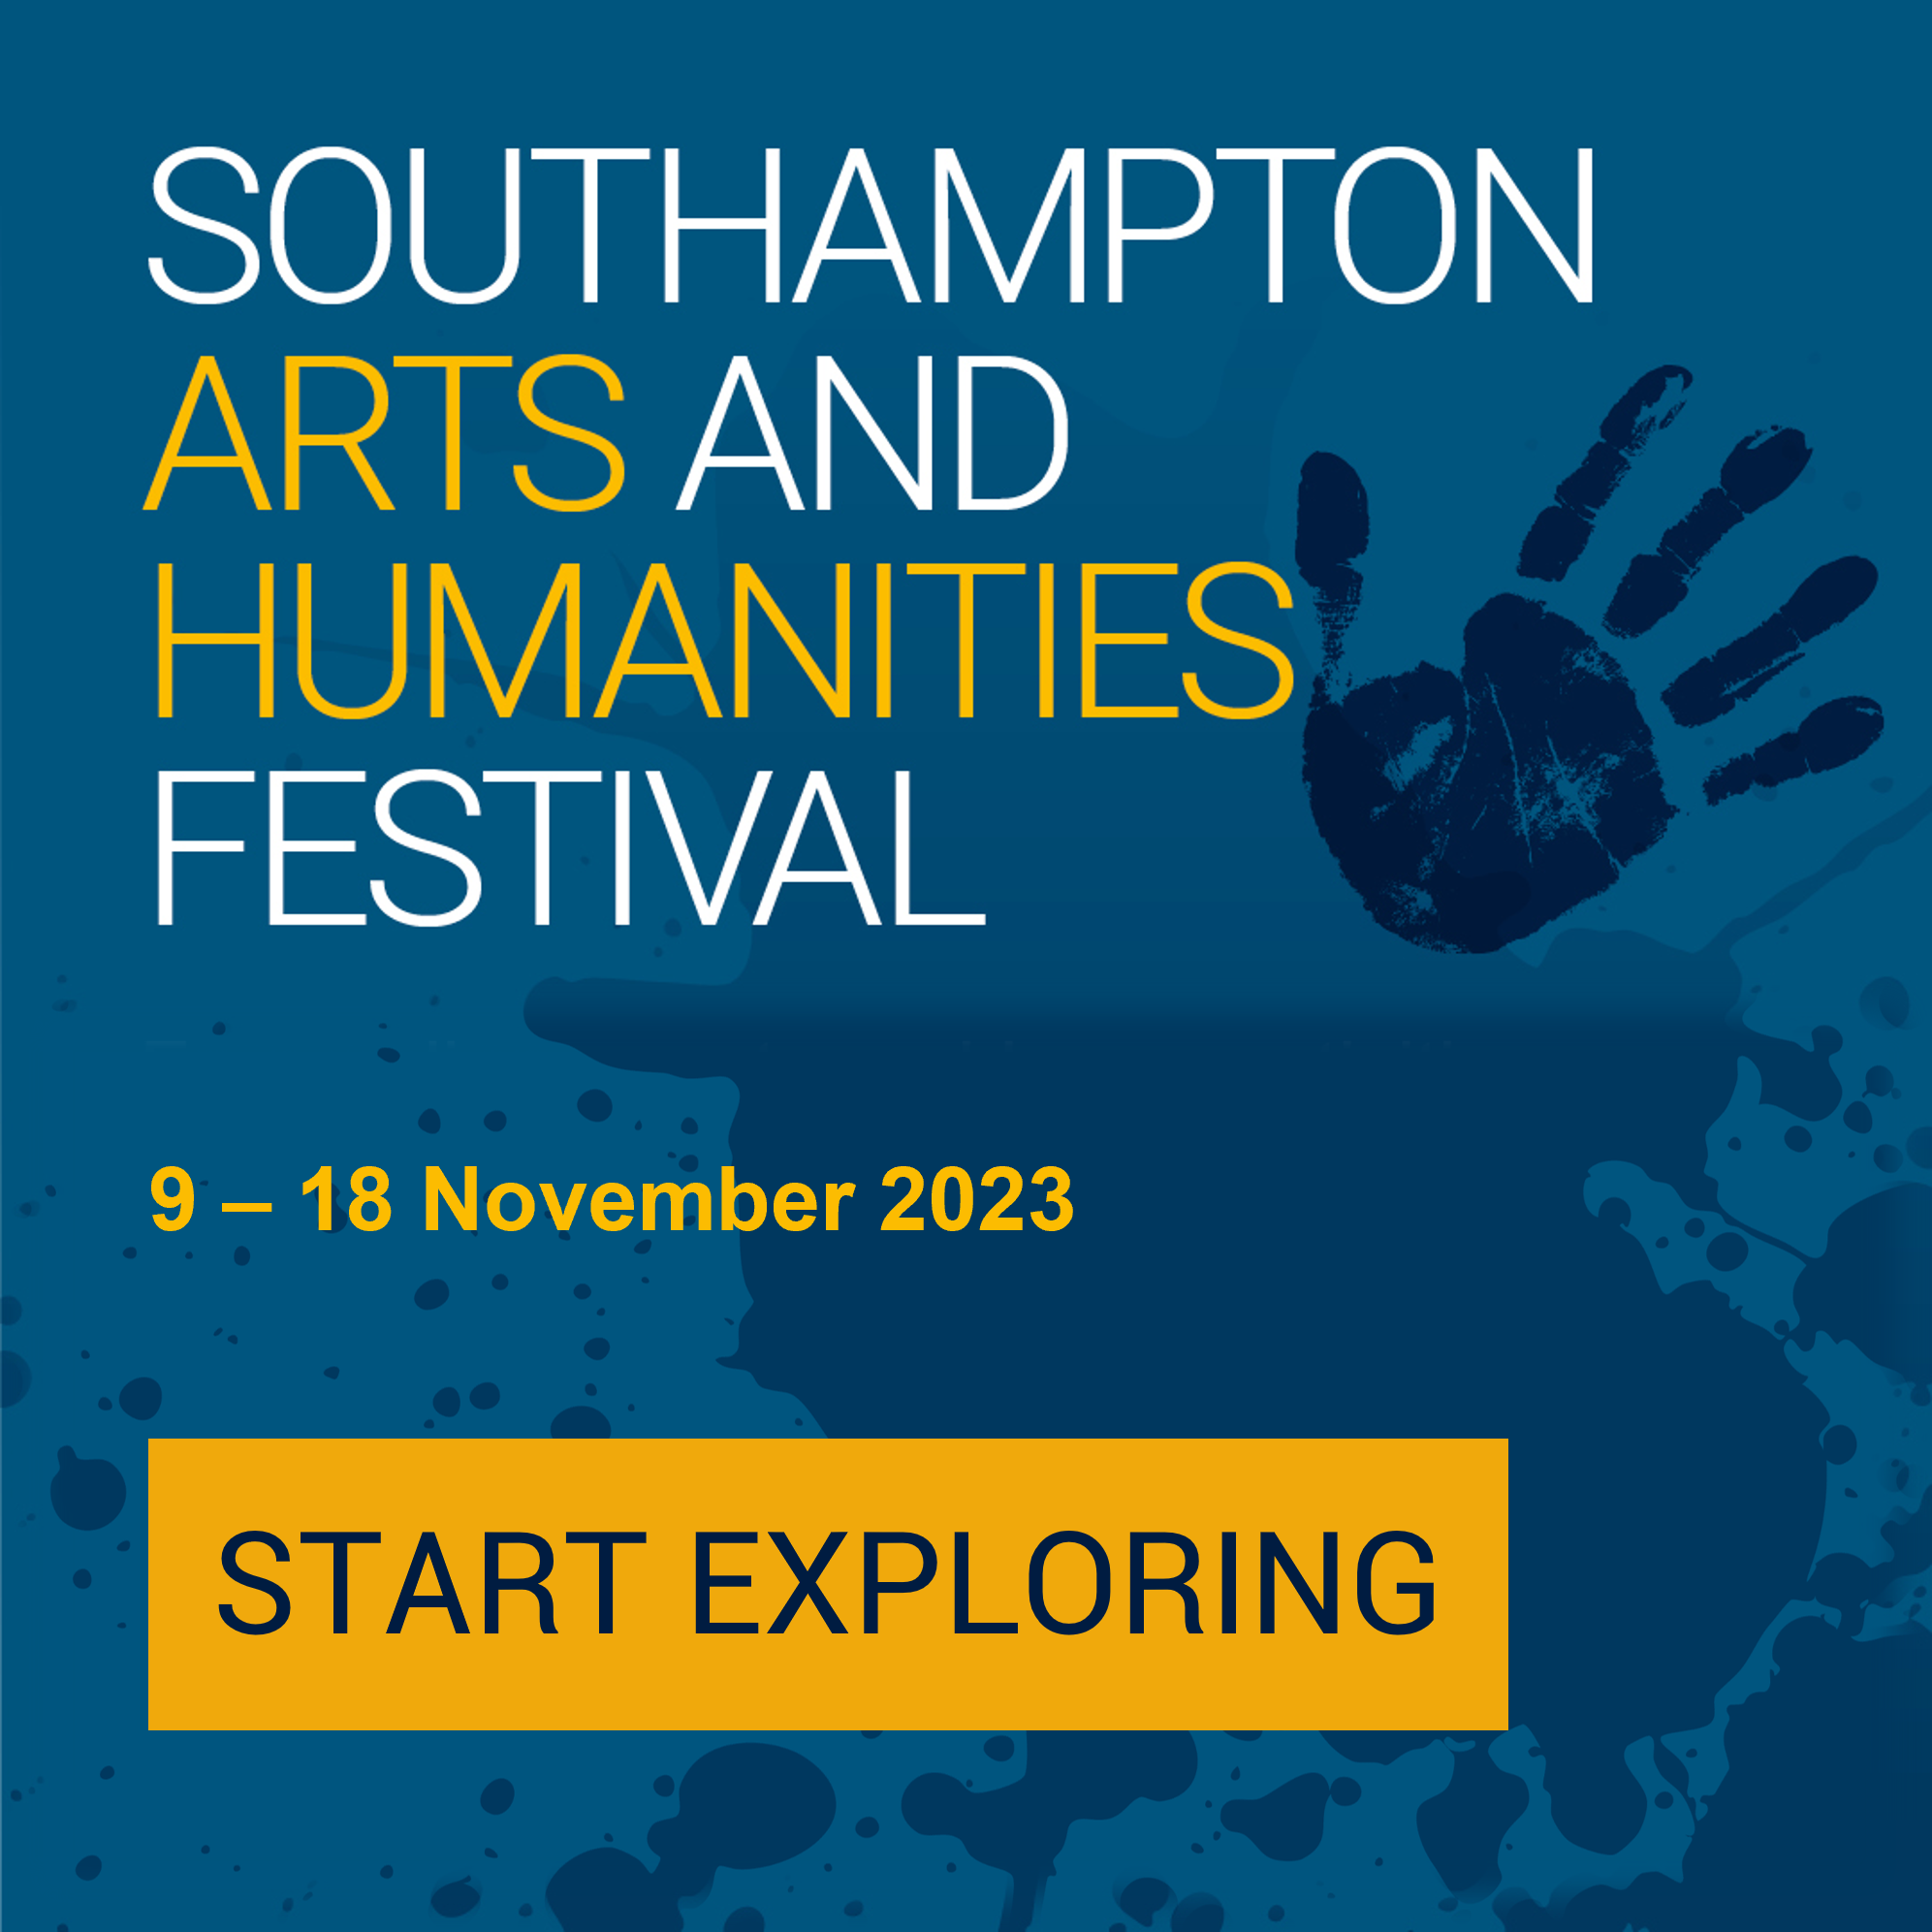 Southampton Arts and Humanities Festival 2023 Home